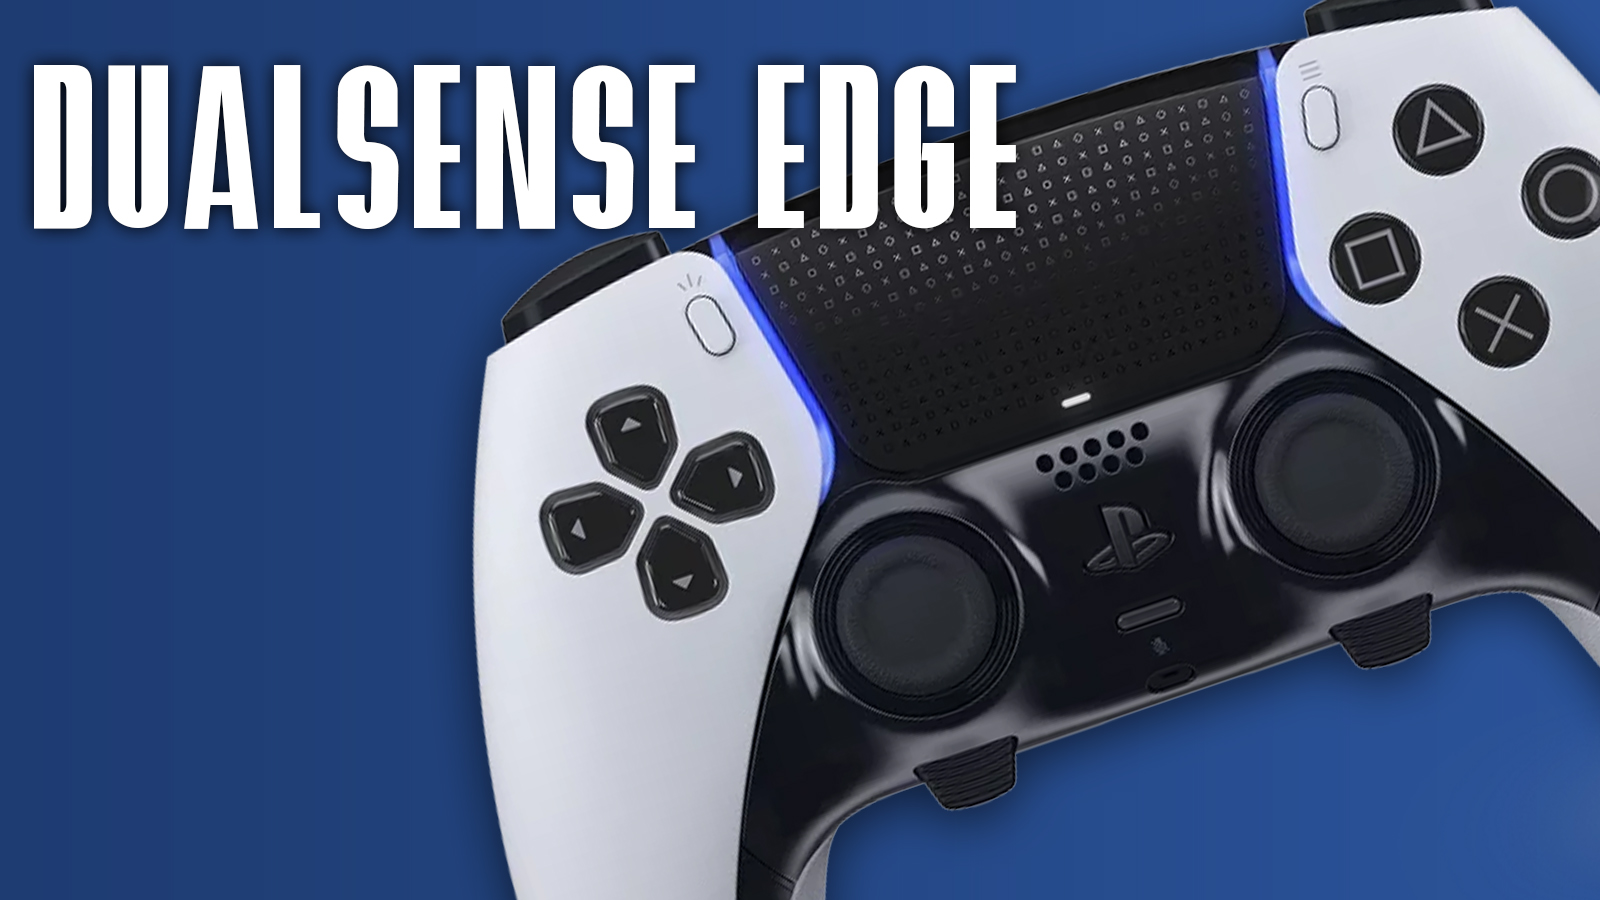 Sony's pricey, customizable DualSense Edge is available at more stores -  Polygon